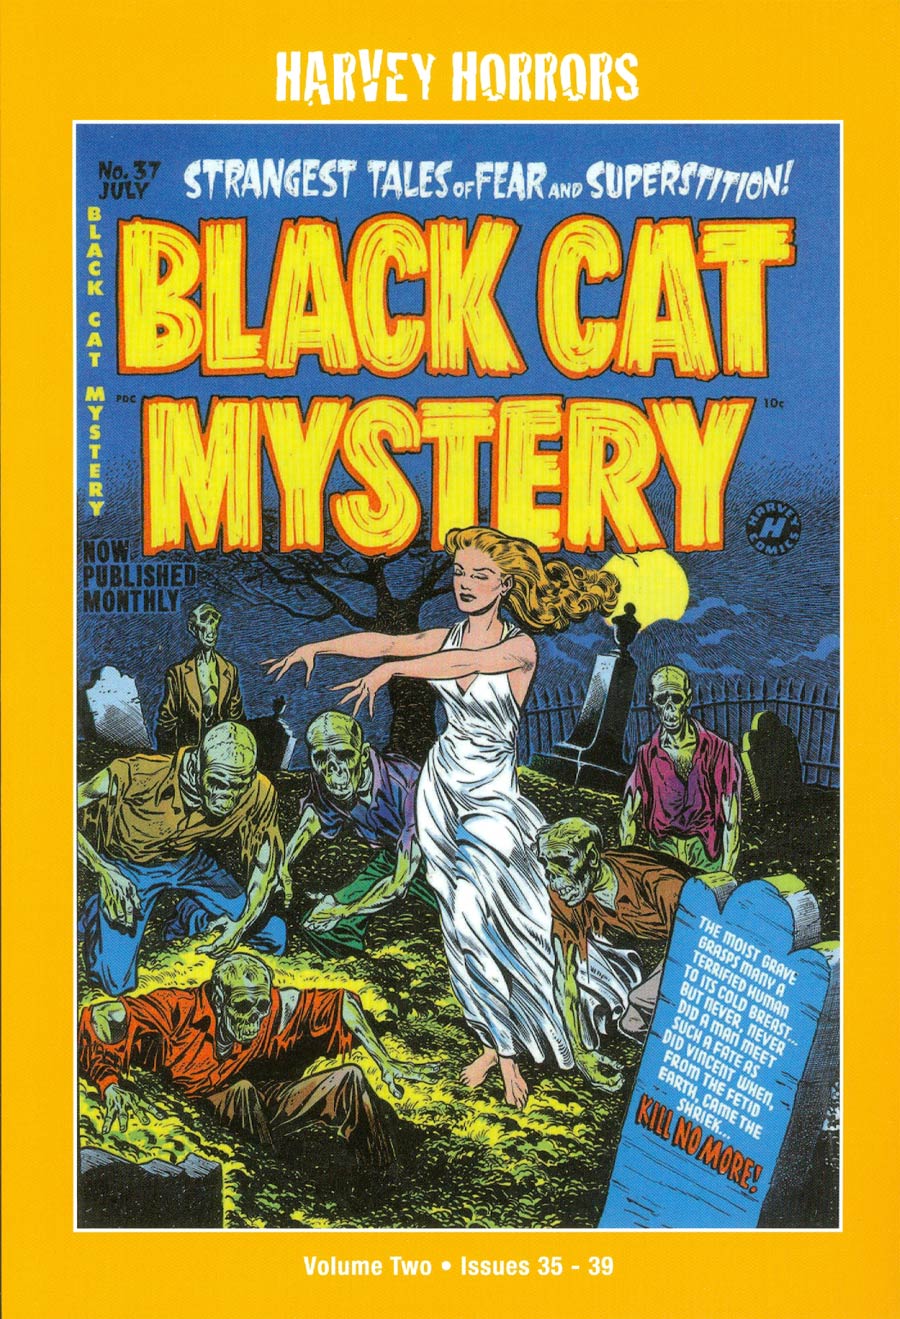 Harvey Horrors Collected Works Black Cat Mystery Softie Vol 2 TP